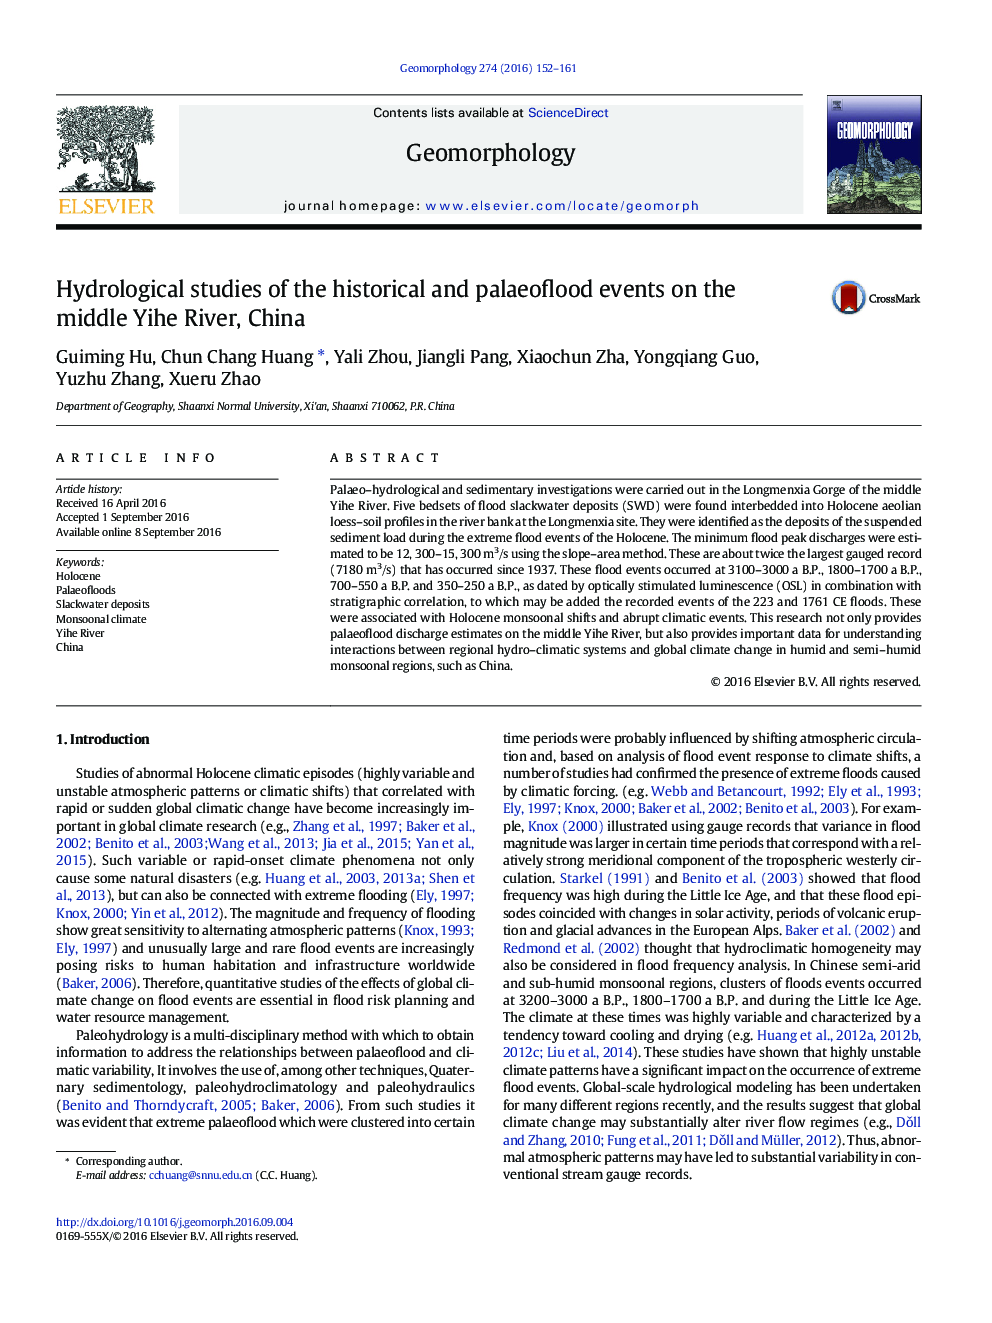 Hydrological studies of the historical and palaeoflood events on the middle Yihe River, China